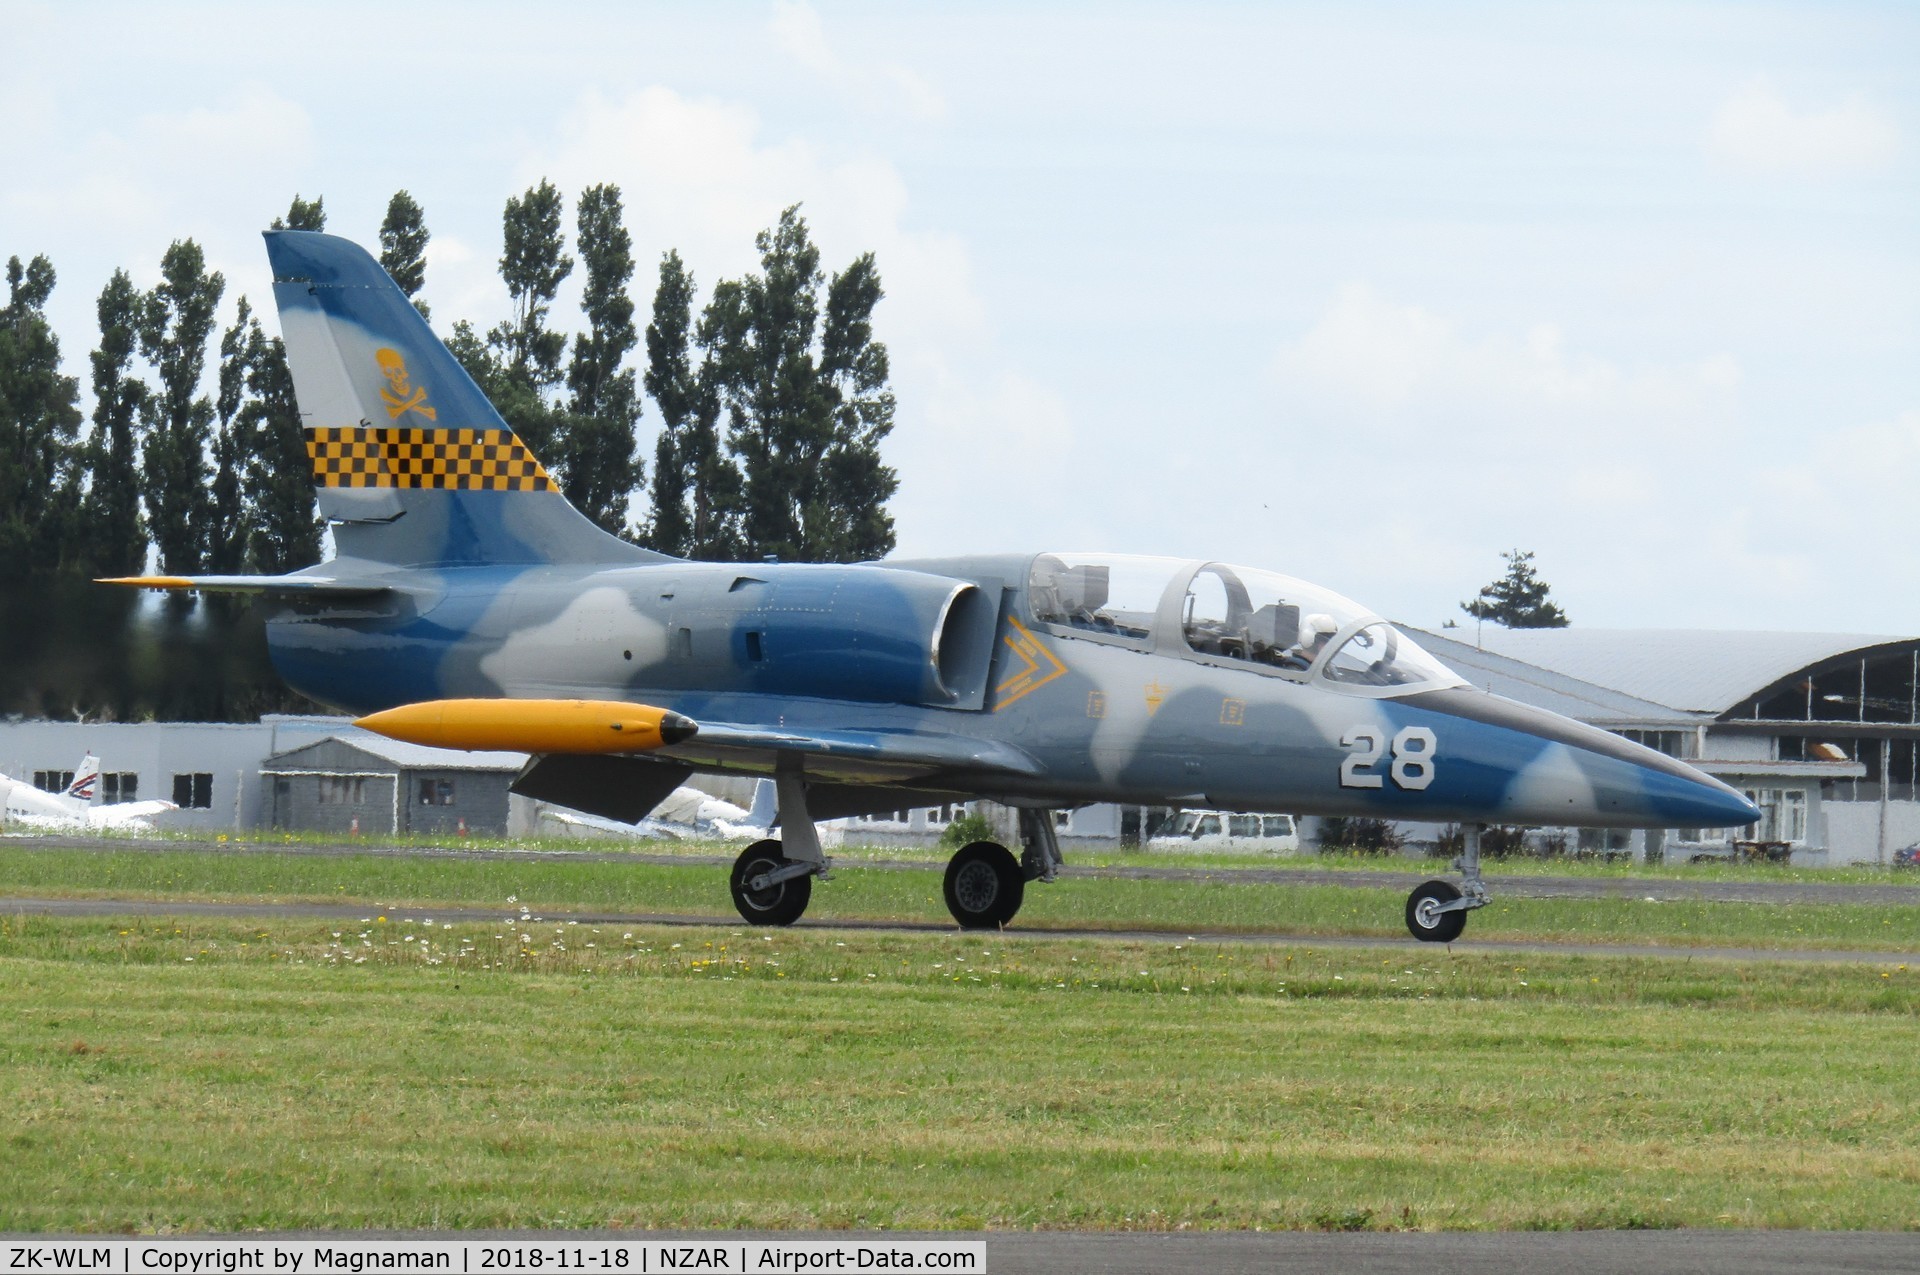 ZK-WLM, Aero L-39 Albatros C/N 332701, taxying in after display